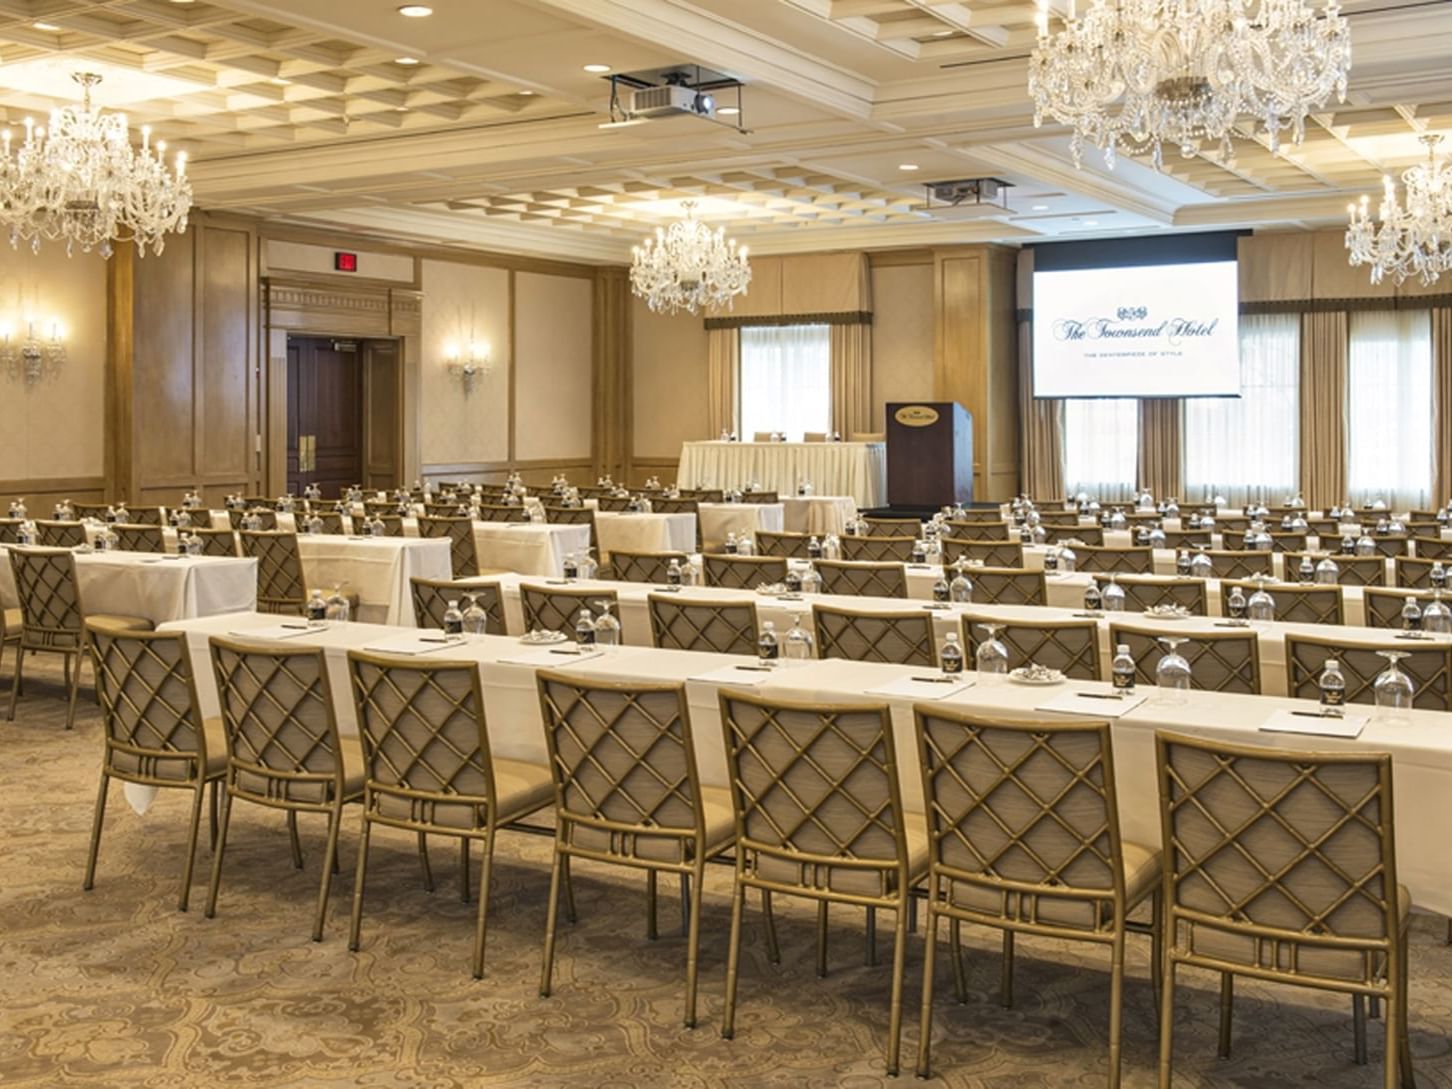 Theater-style seating in Townsend Ballroom at Townsend Hotel